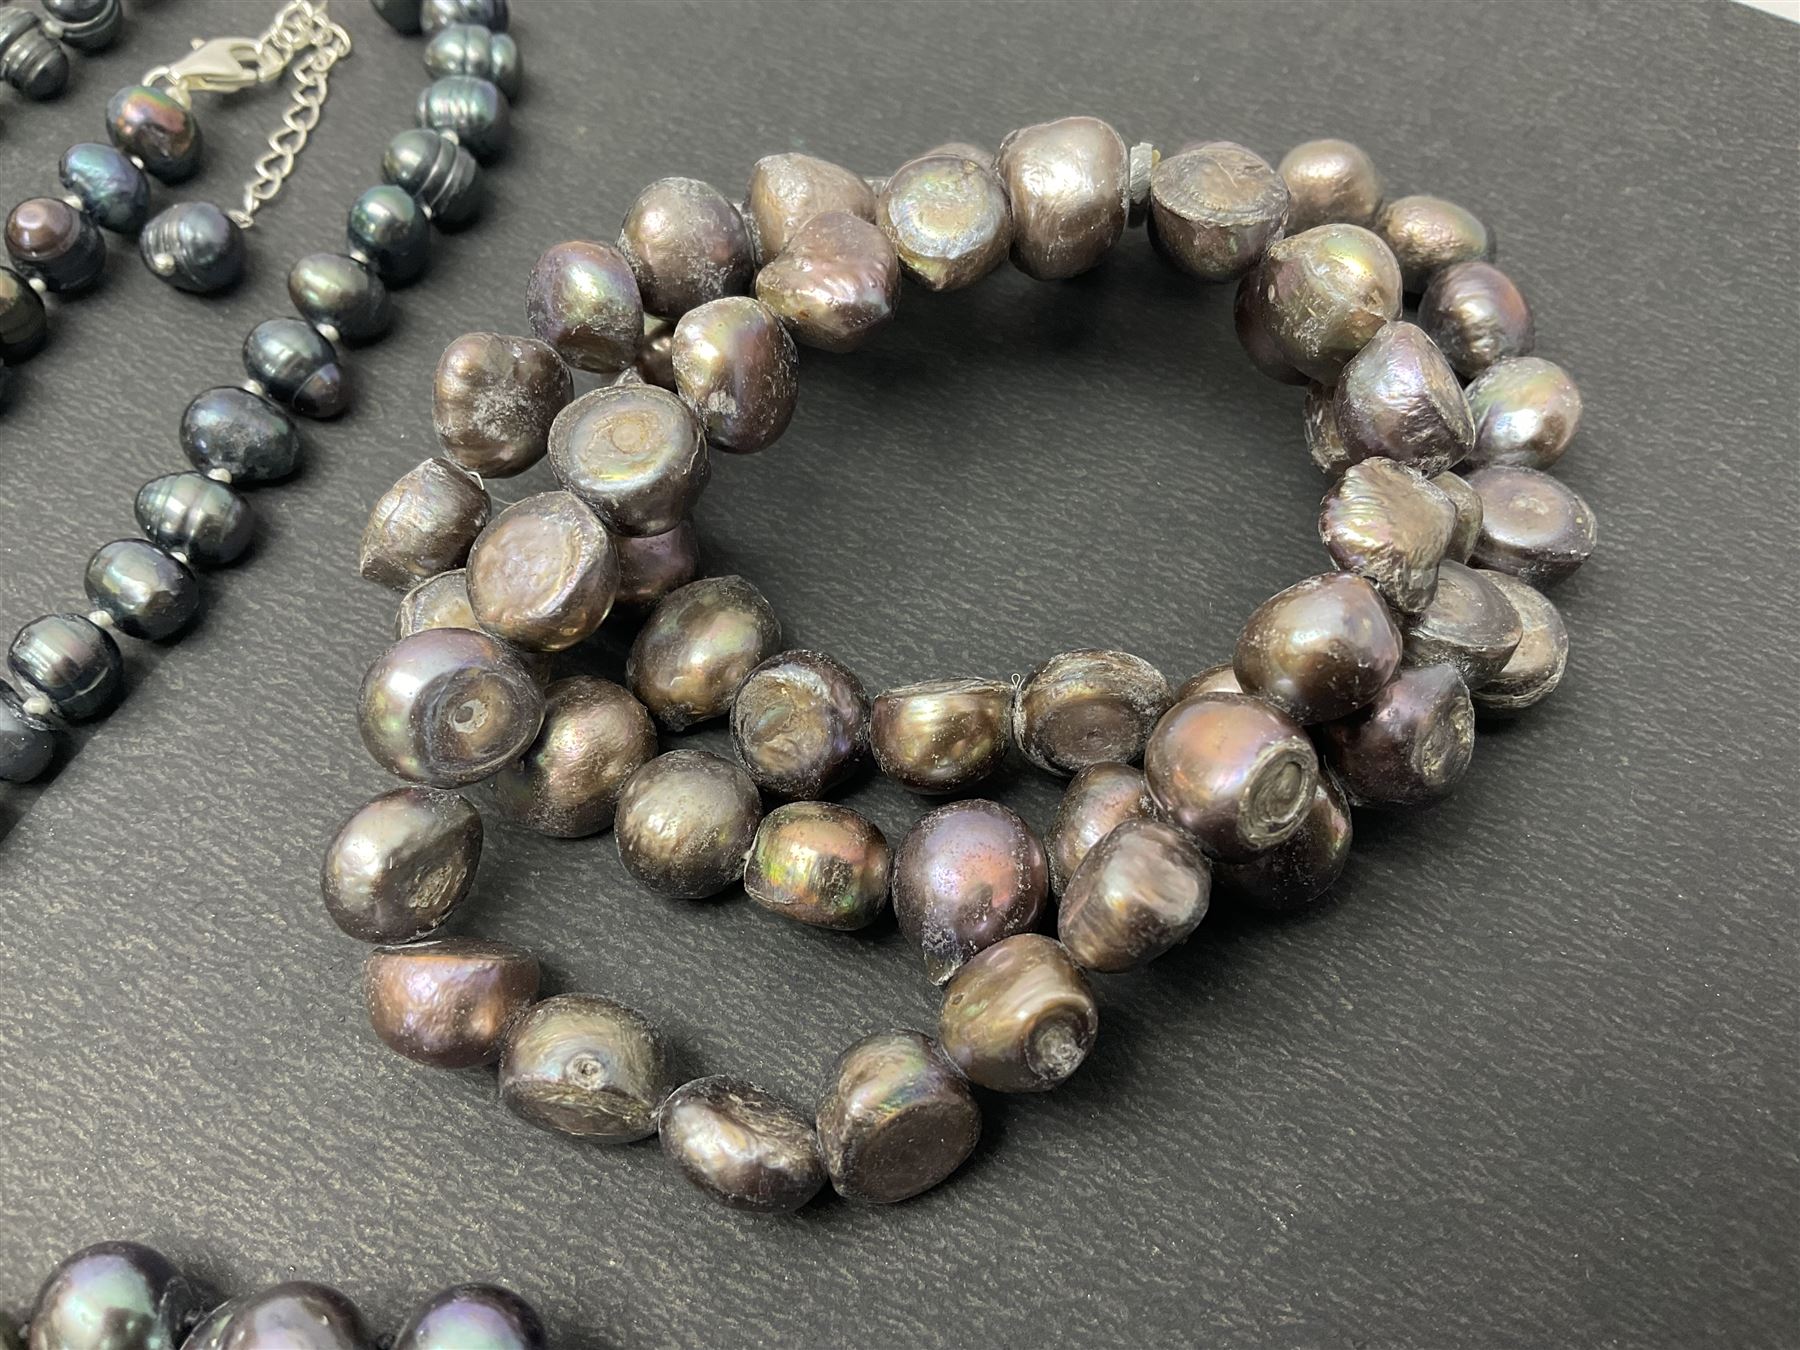 Four fresh water pearl necklaces - Image 16 of 77